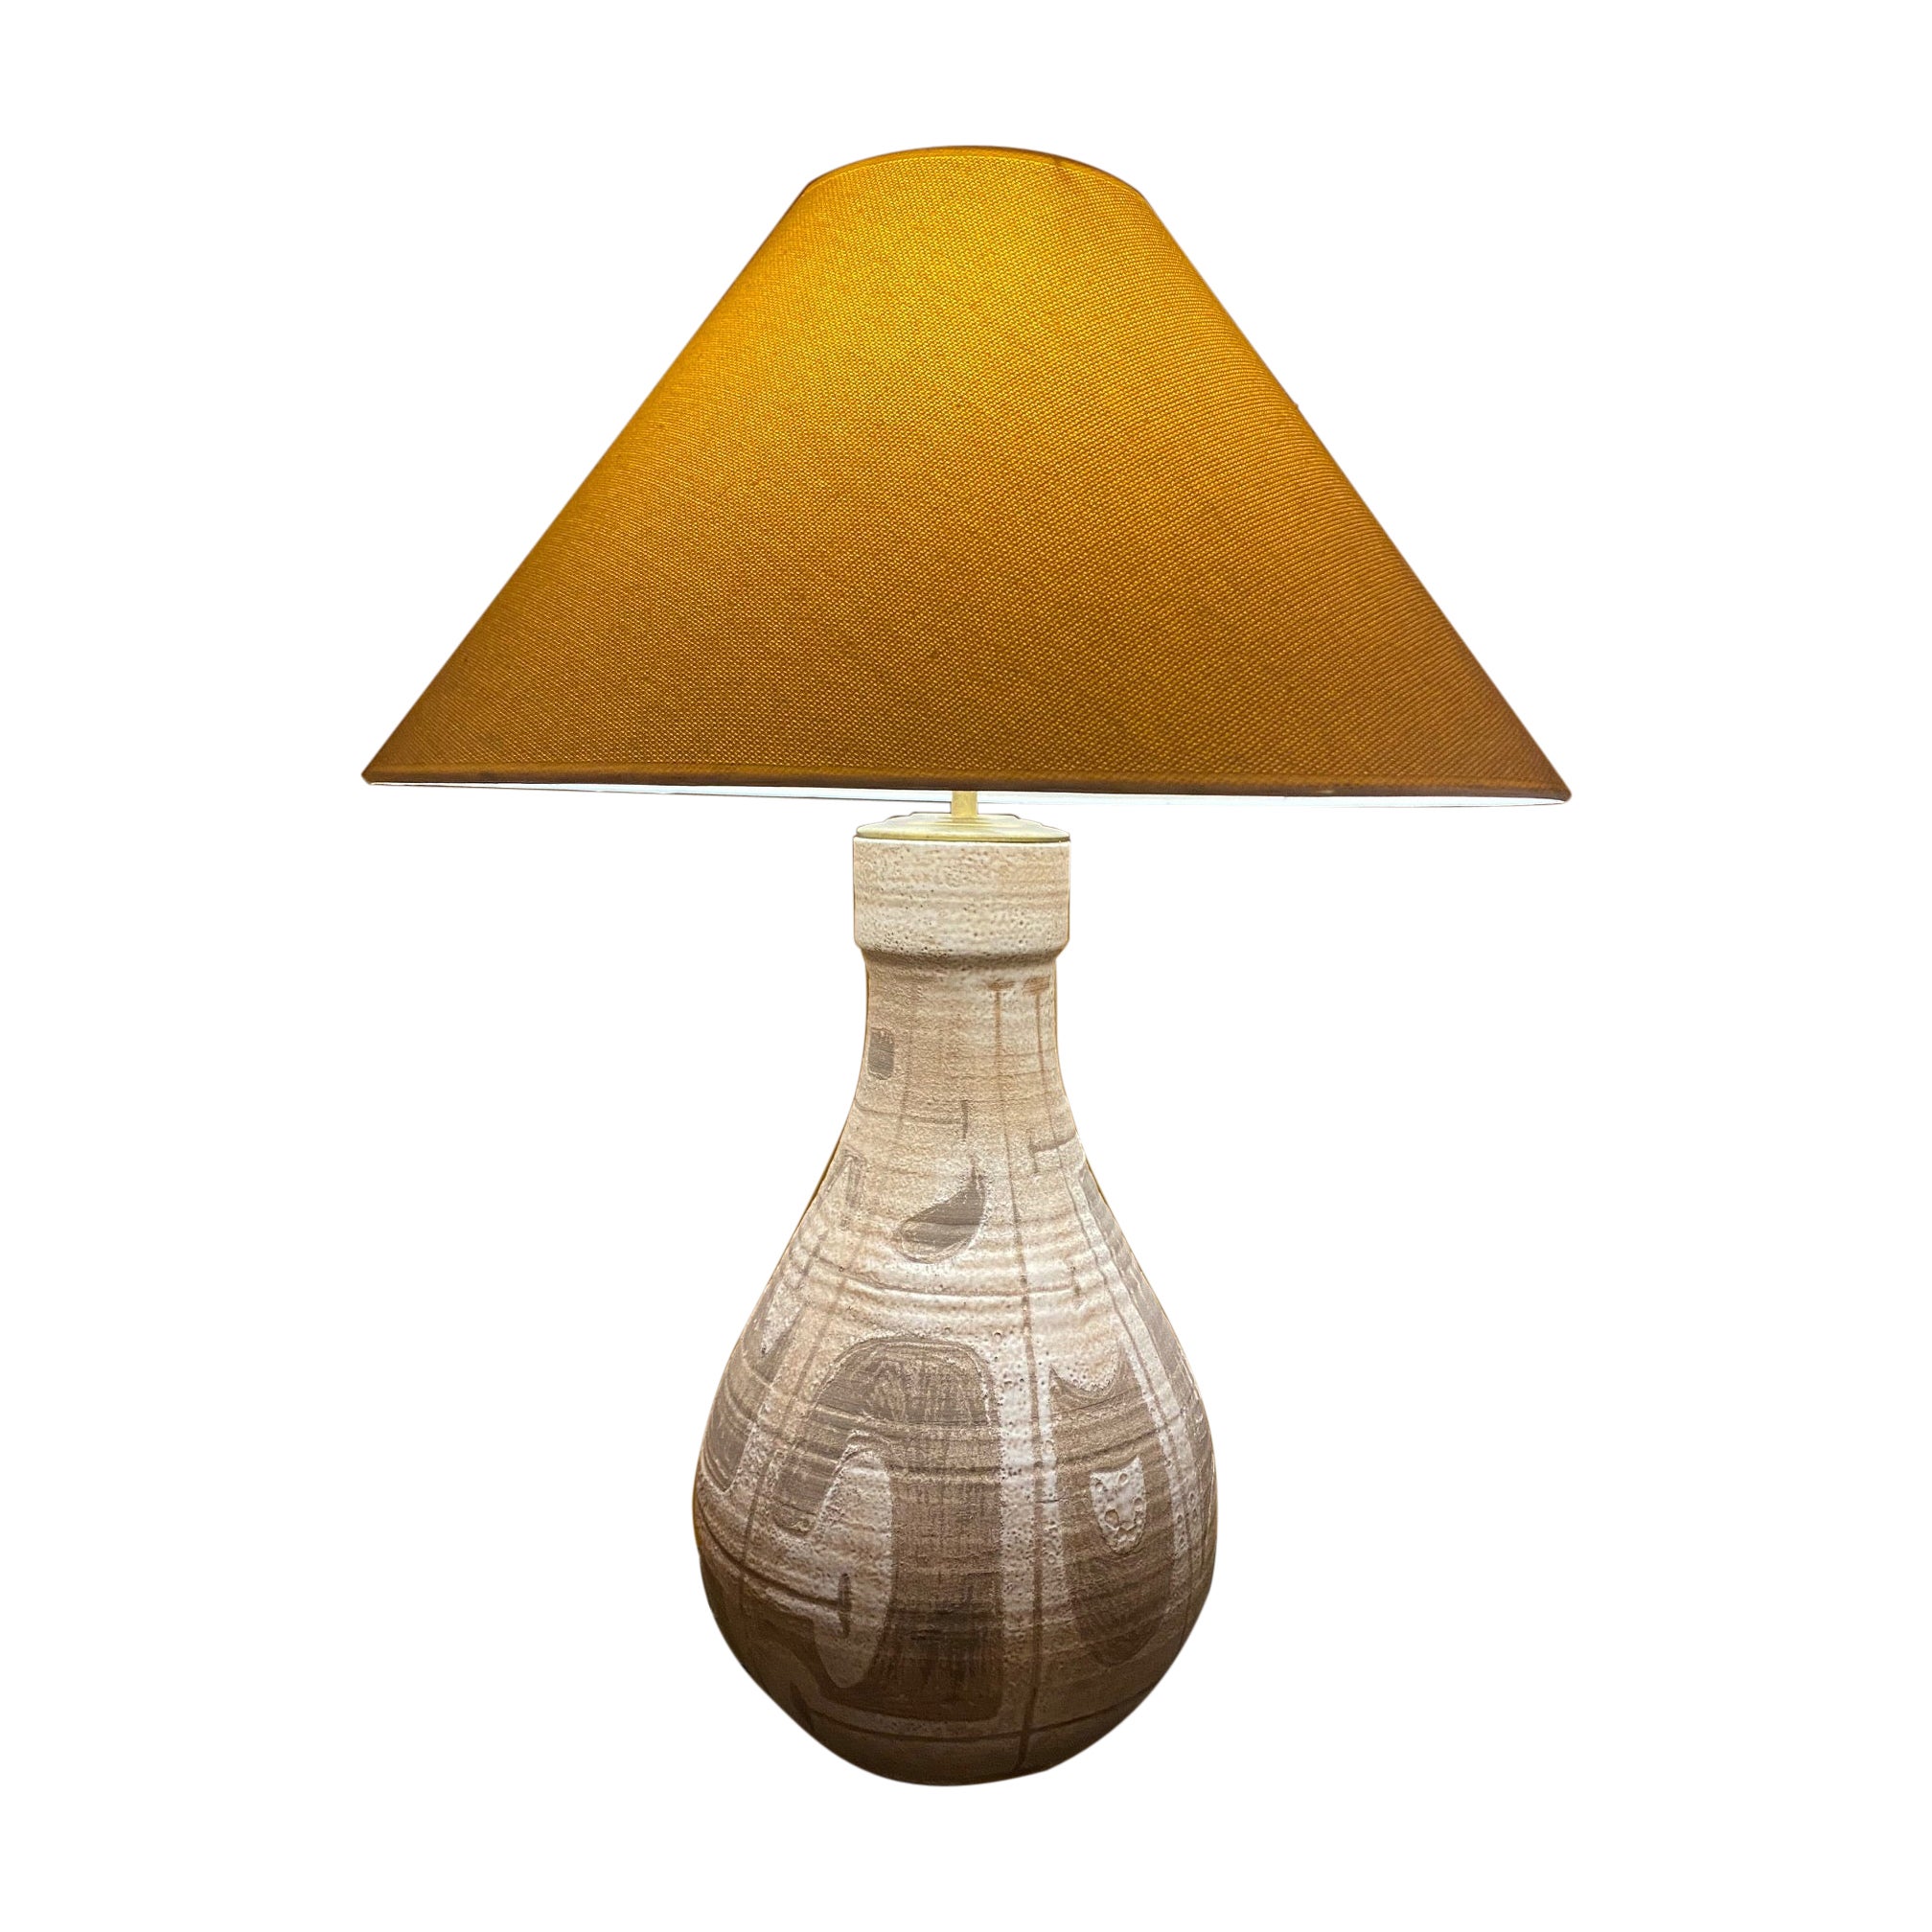 Ceramic Table Lamp, Accolay, France, 1960s